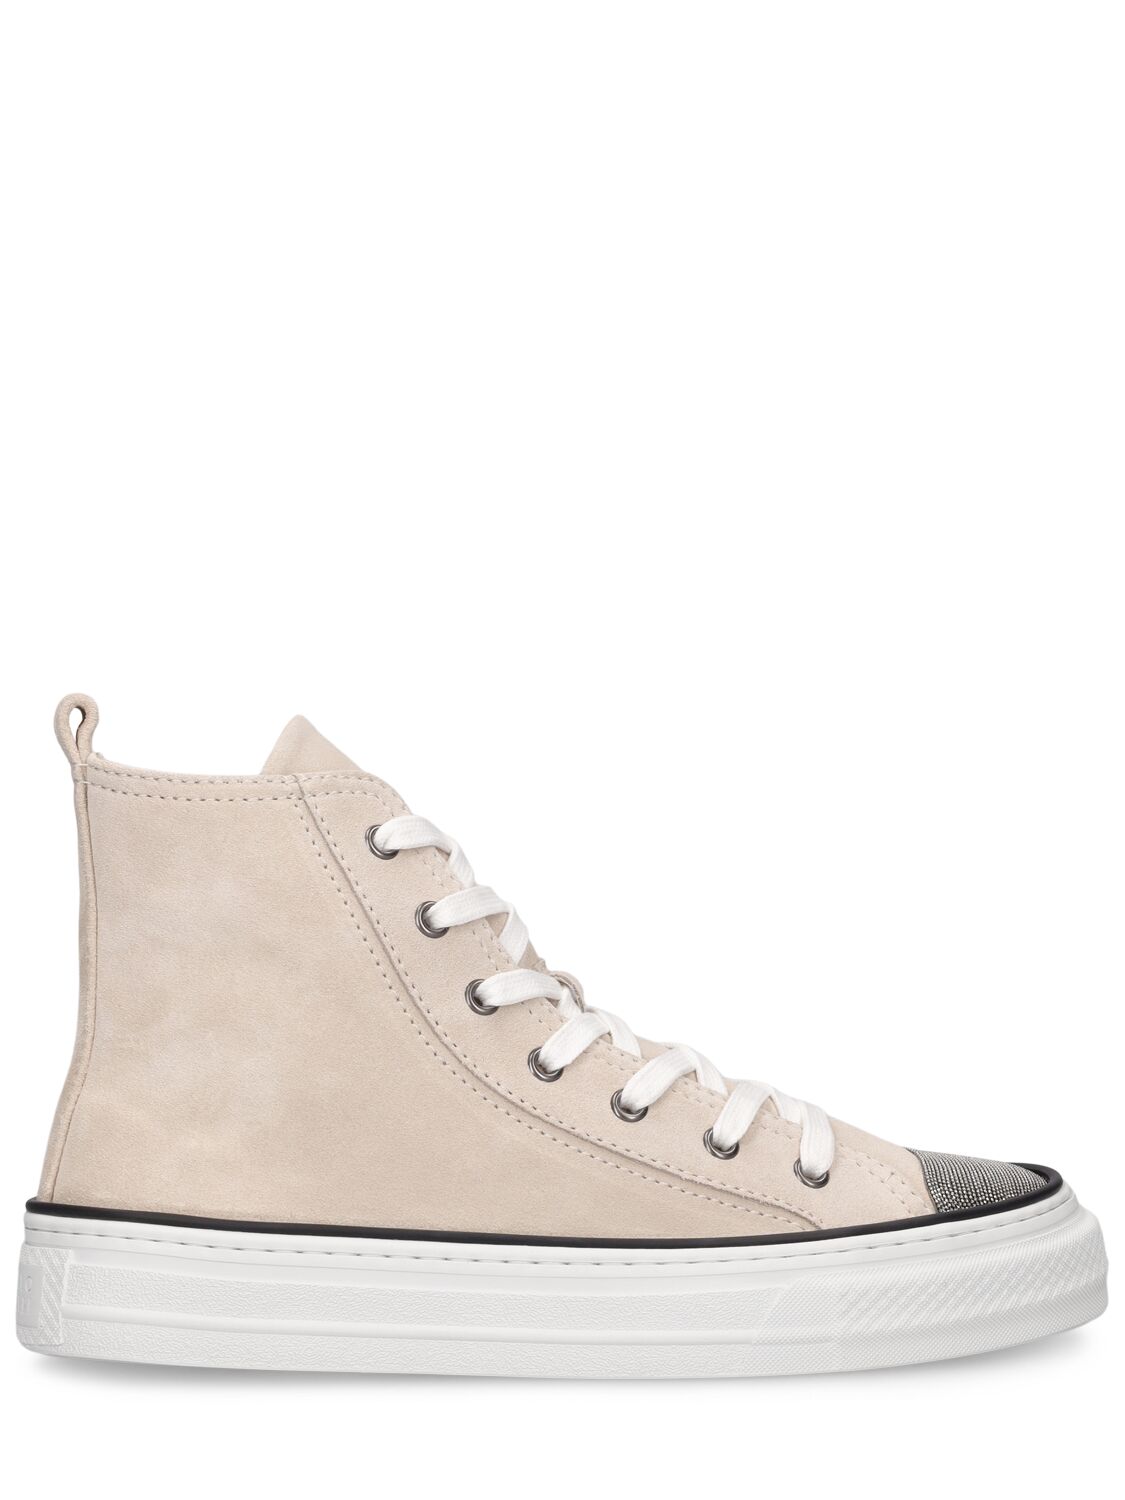 Brunello Cucinelli 20mm Suede High Top Sneakers In Ivory